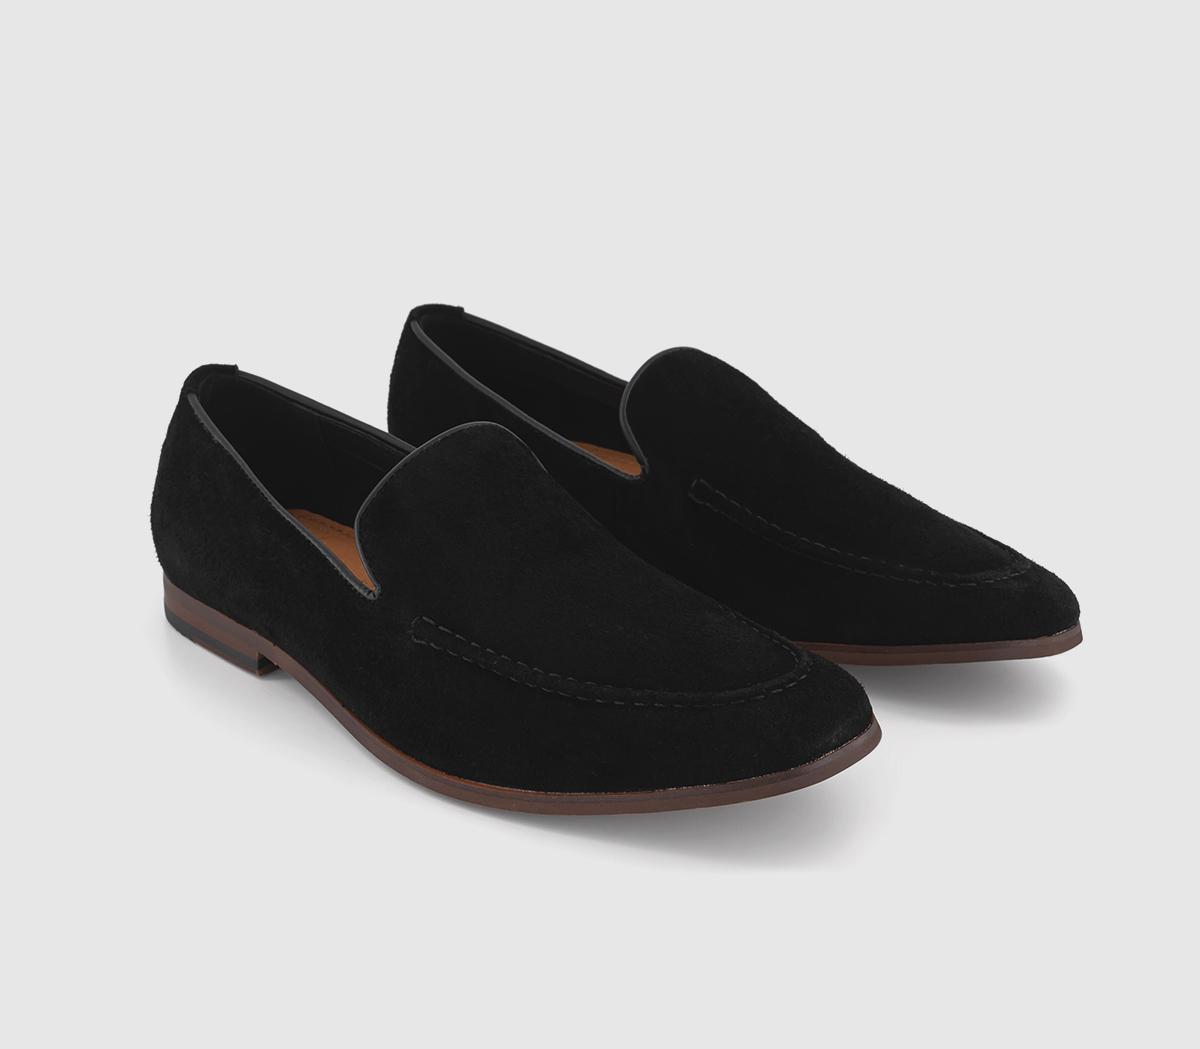 OFFICE Mens Cody Slip On Loafers Black Suede, 10